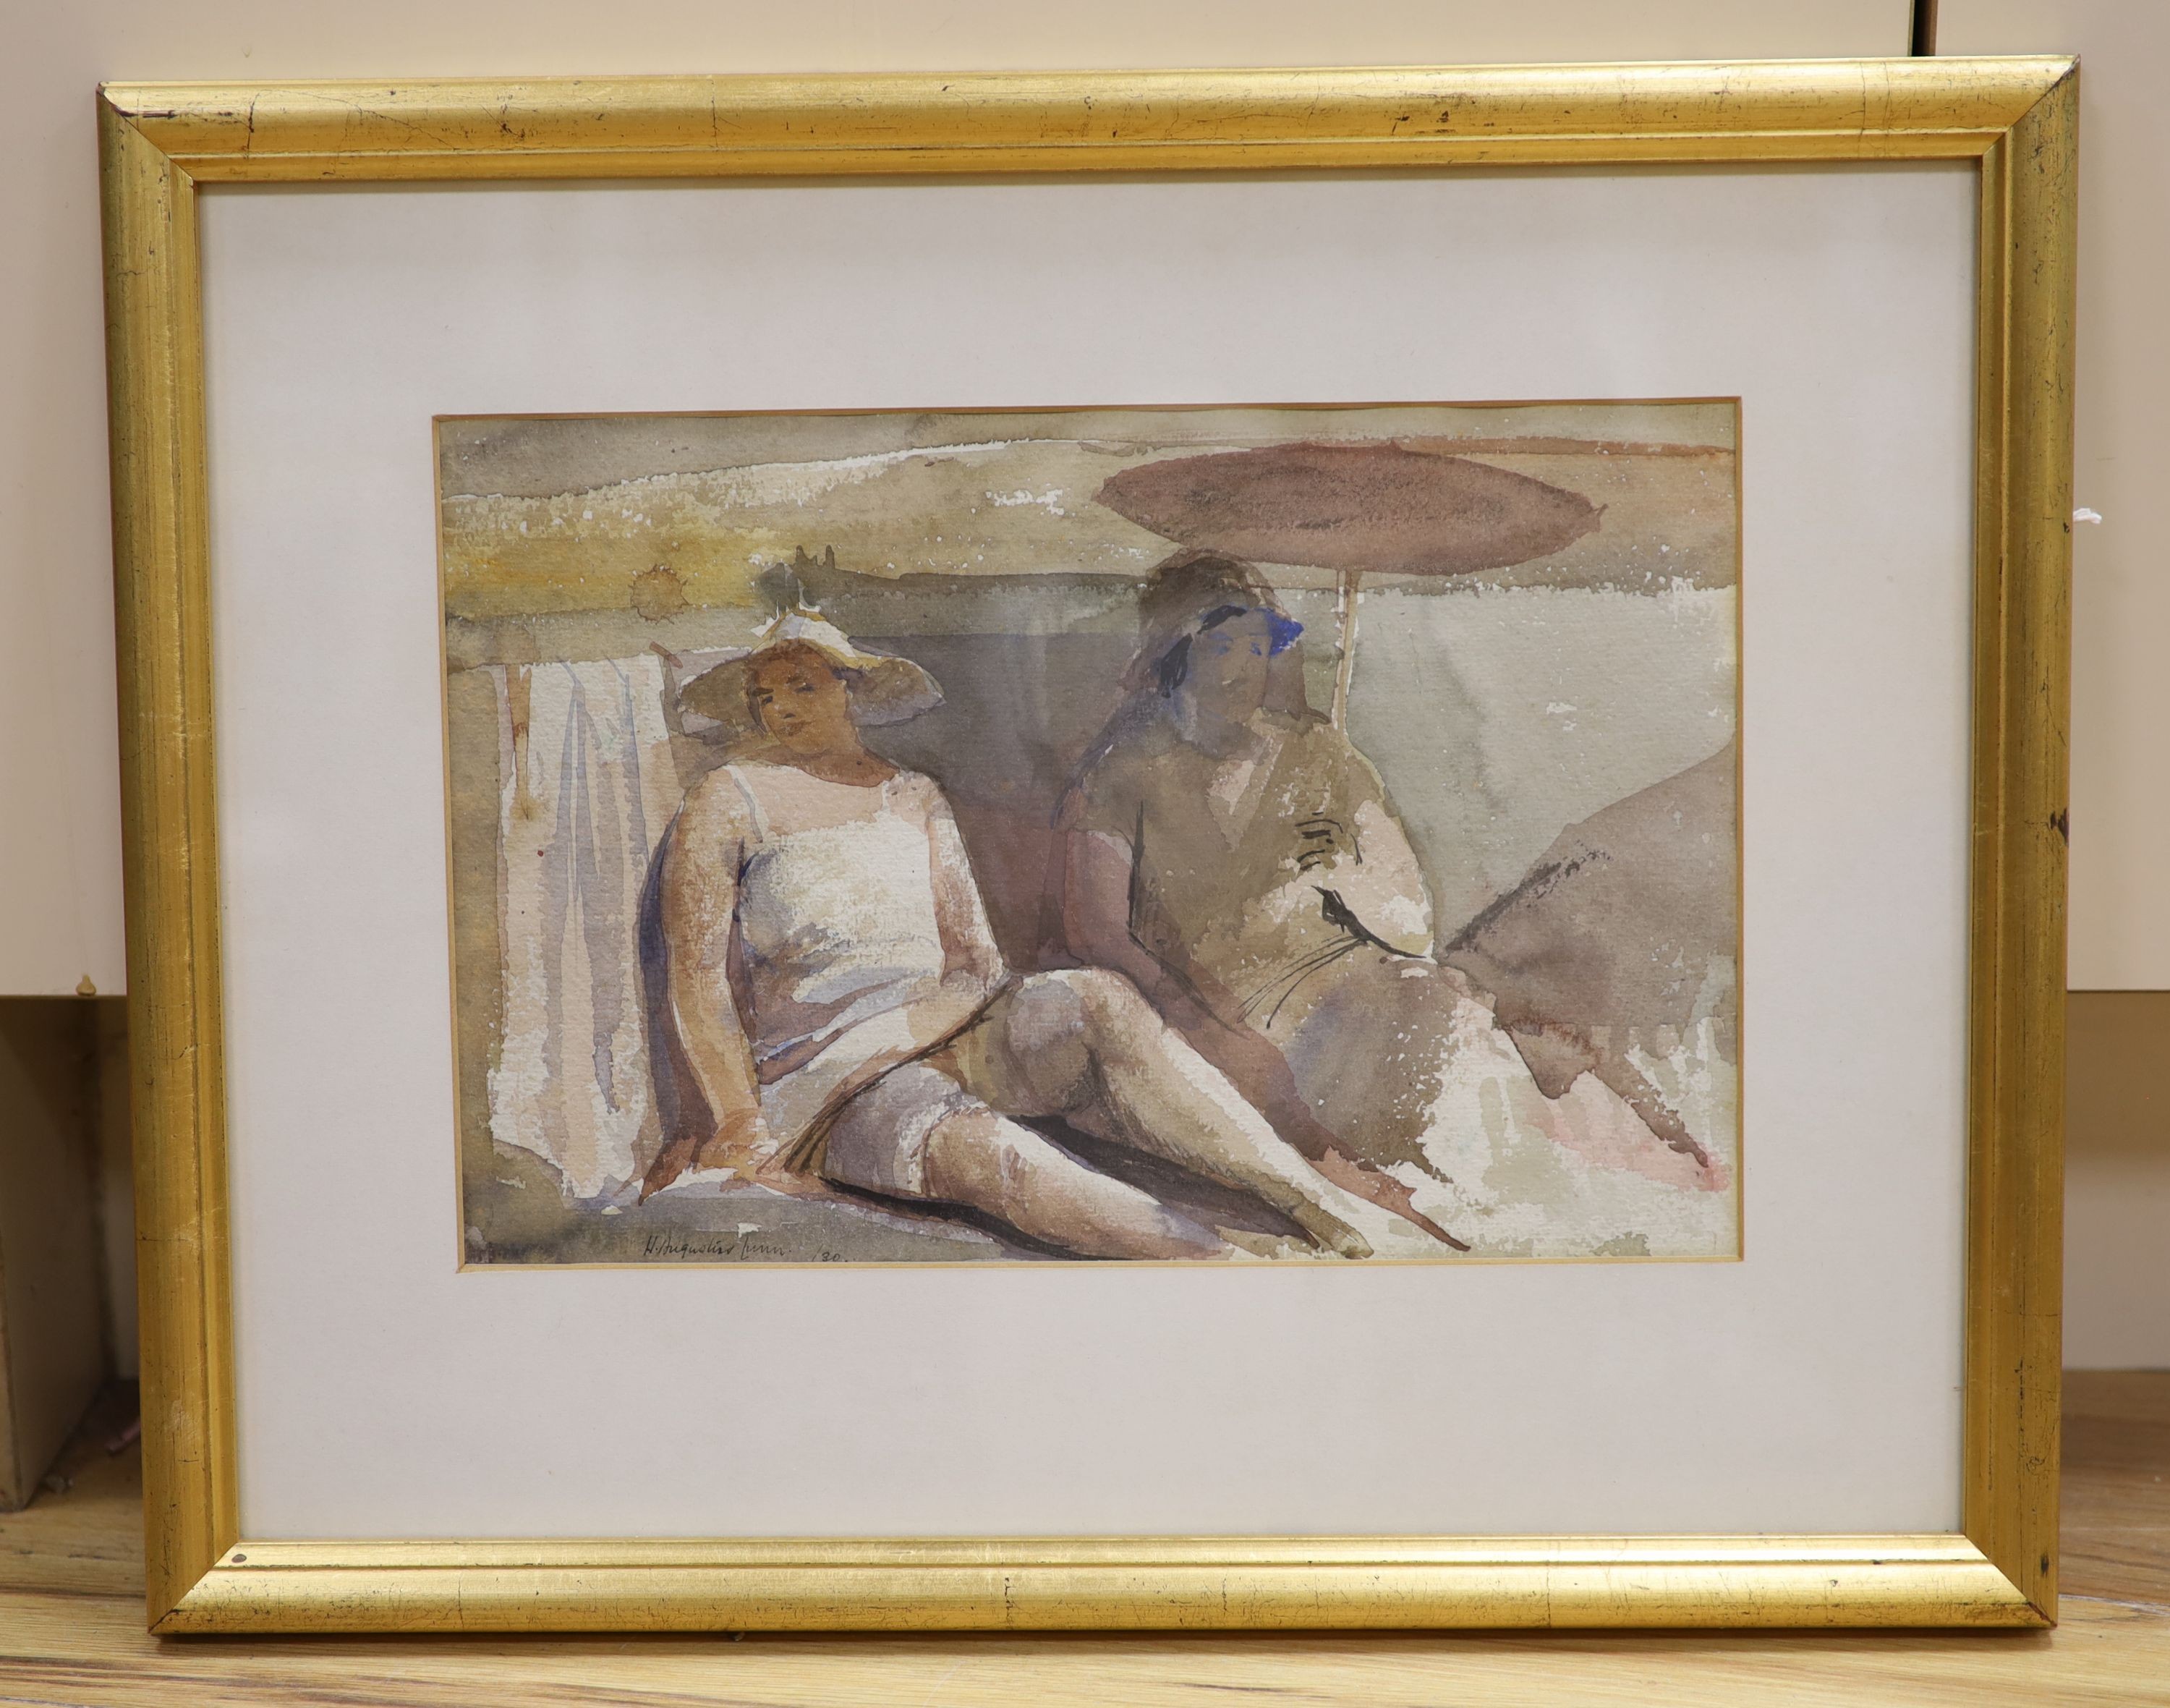 Augustus Lunn (1905-1986), watercolour, Sunbathers, signed and dated ‘30, 21 x 32cm.